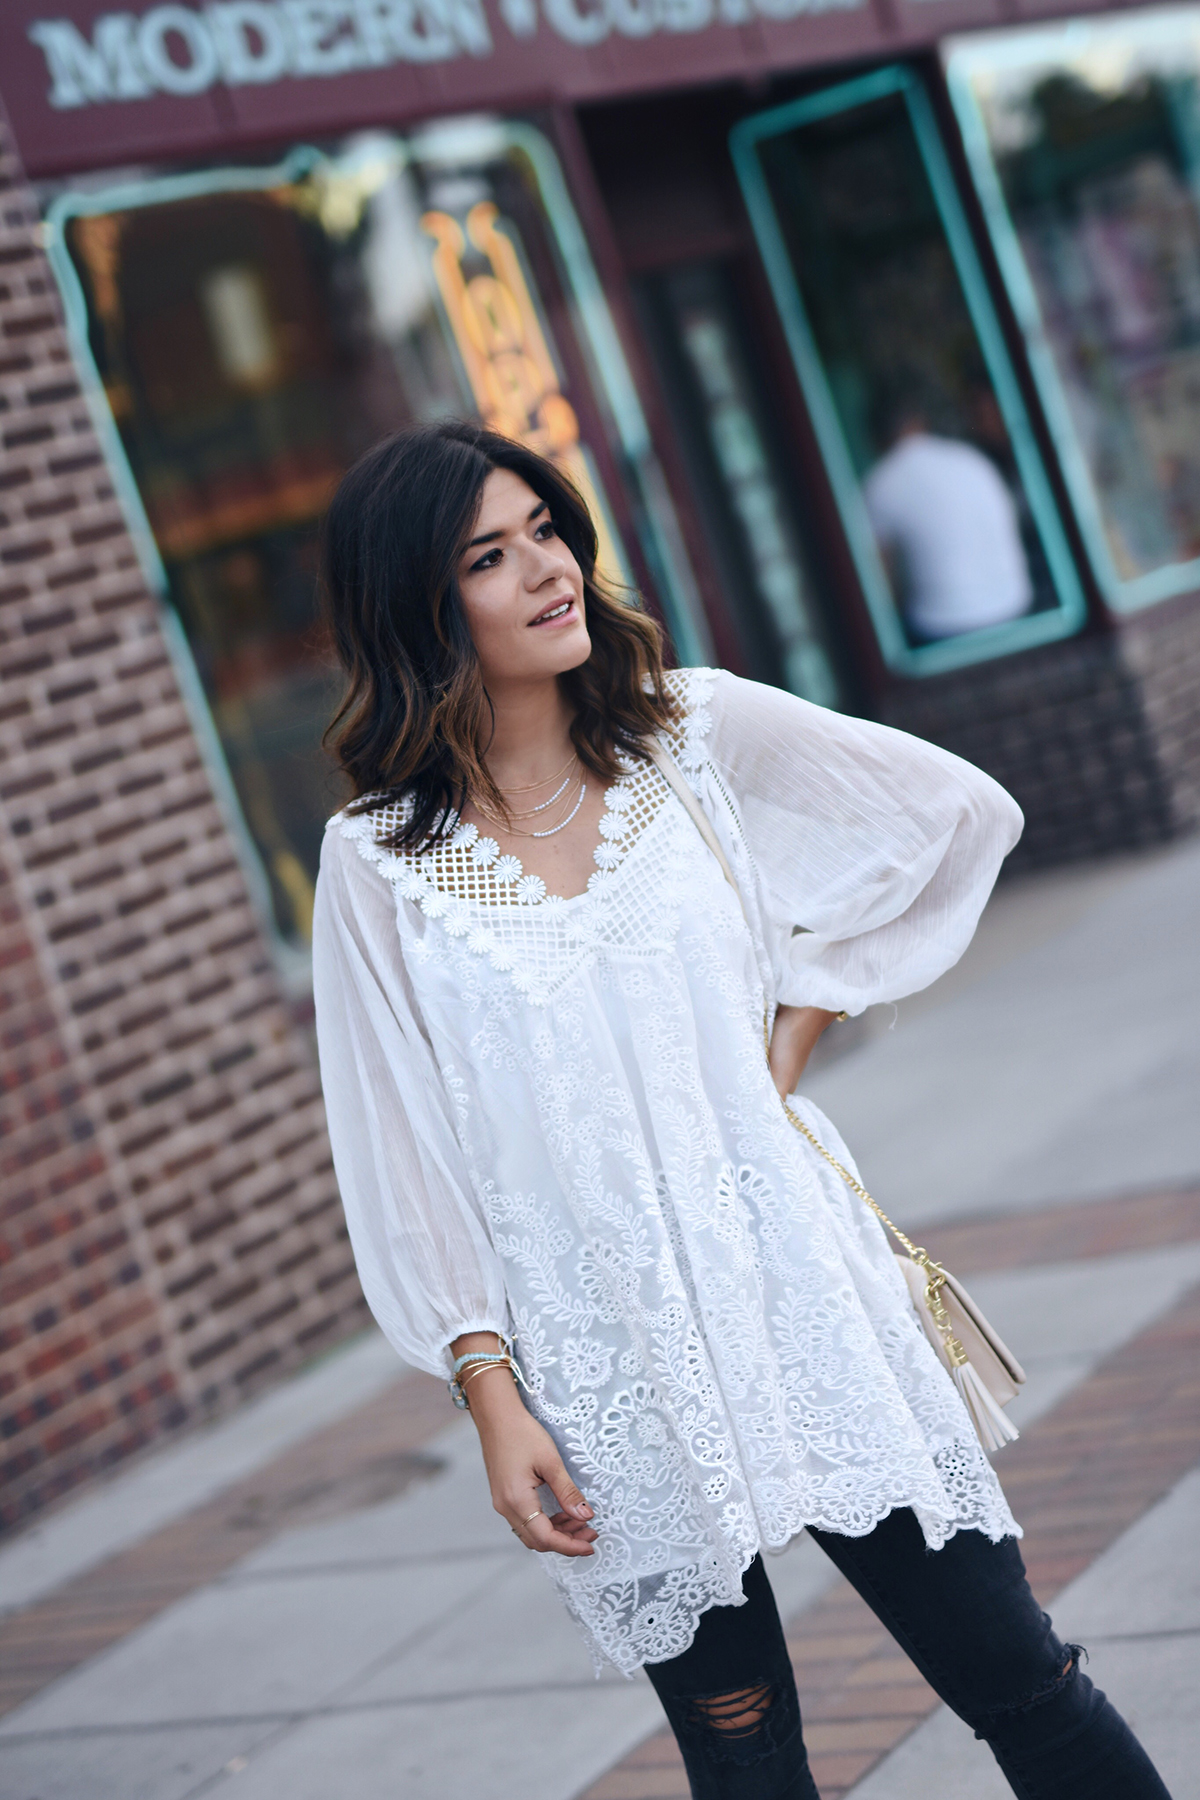 Carolina Hellal of Chic Talk wearing a Chicwish white tunic, Charming Charlie clutch, Madewell jeans and criss cross mules